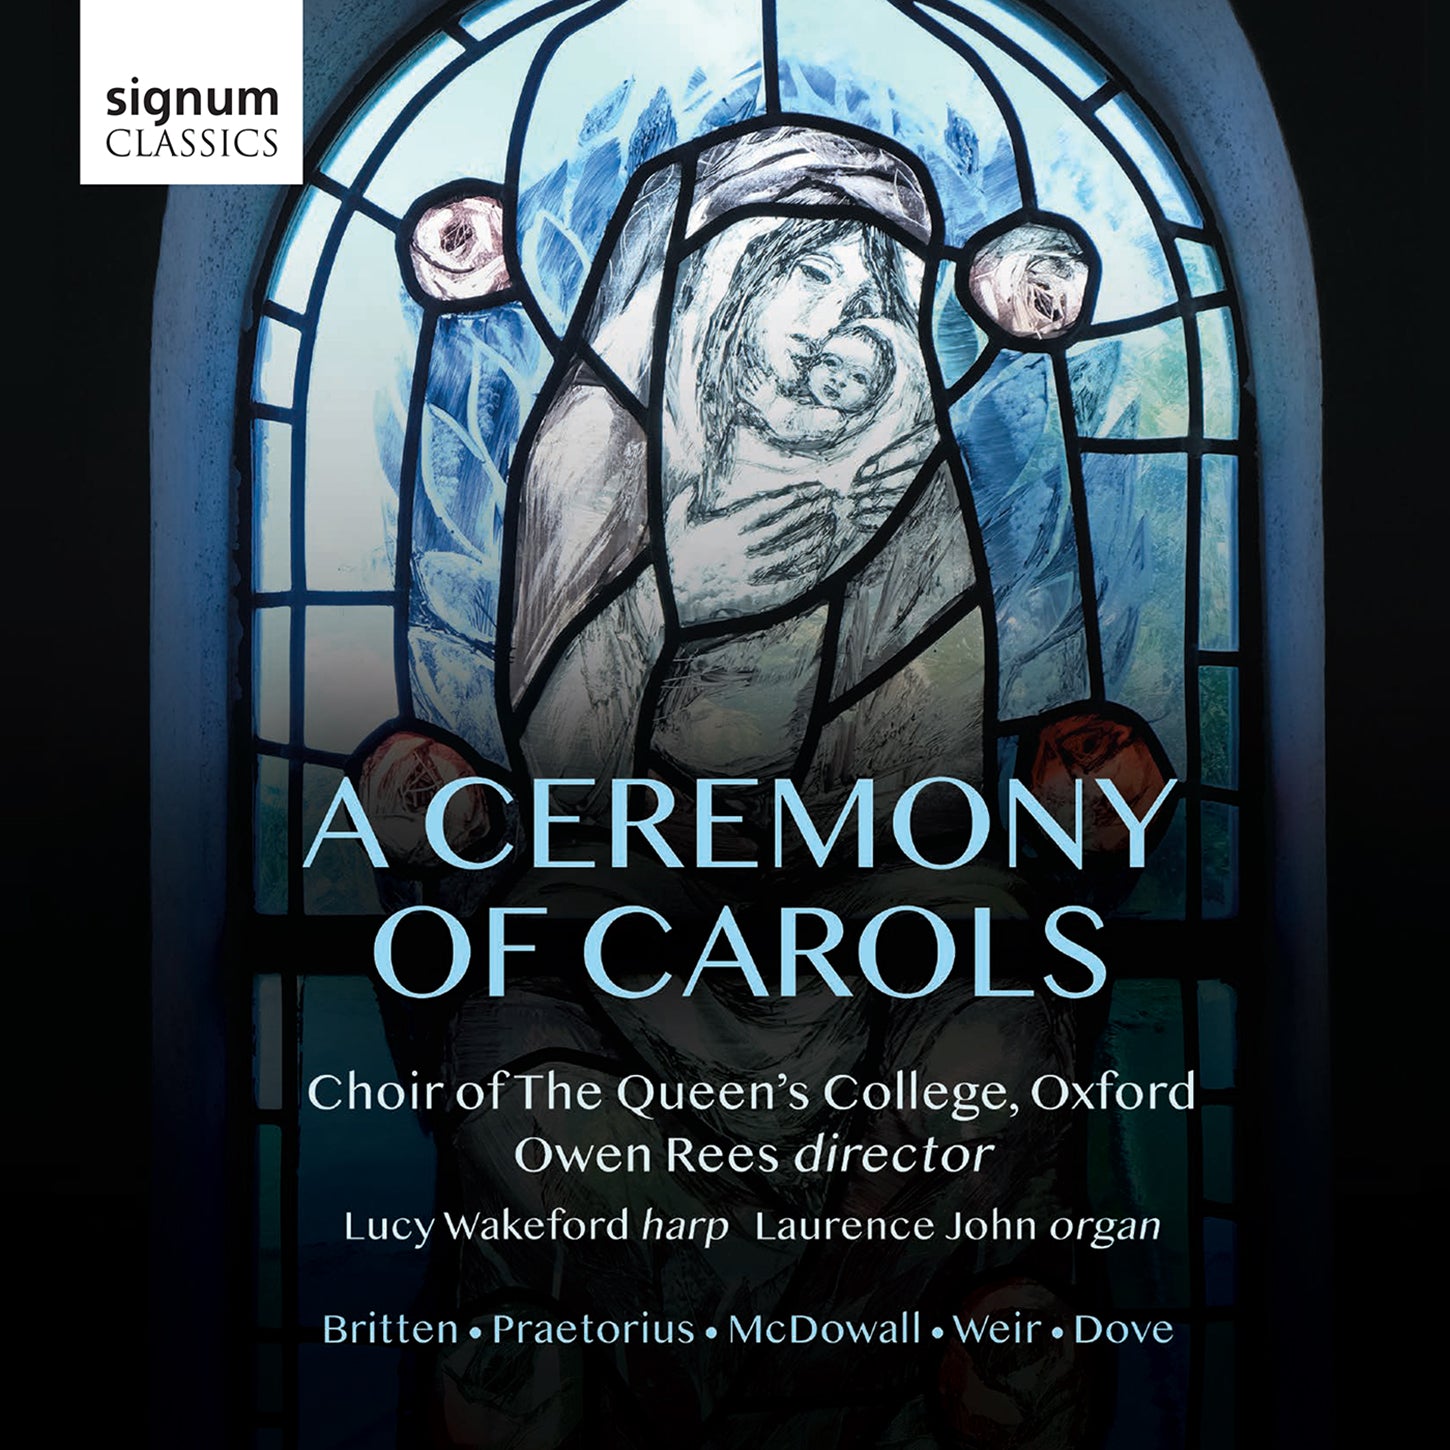 A Ceremony of Carols / Rees, Choir of the Queen's College Oxford